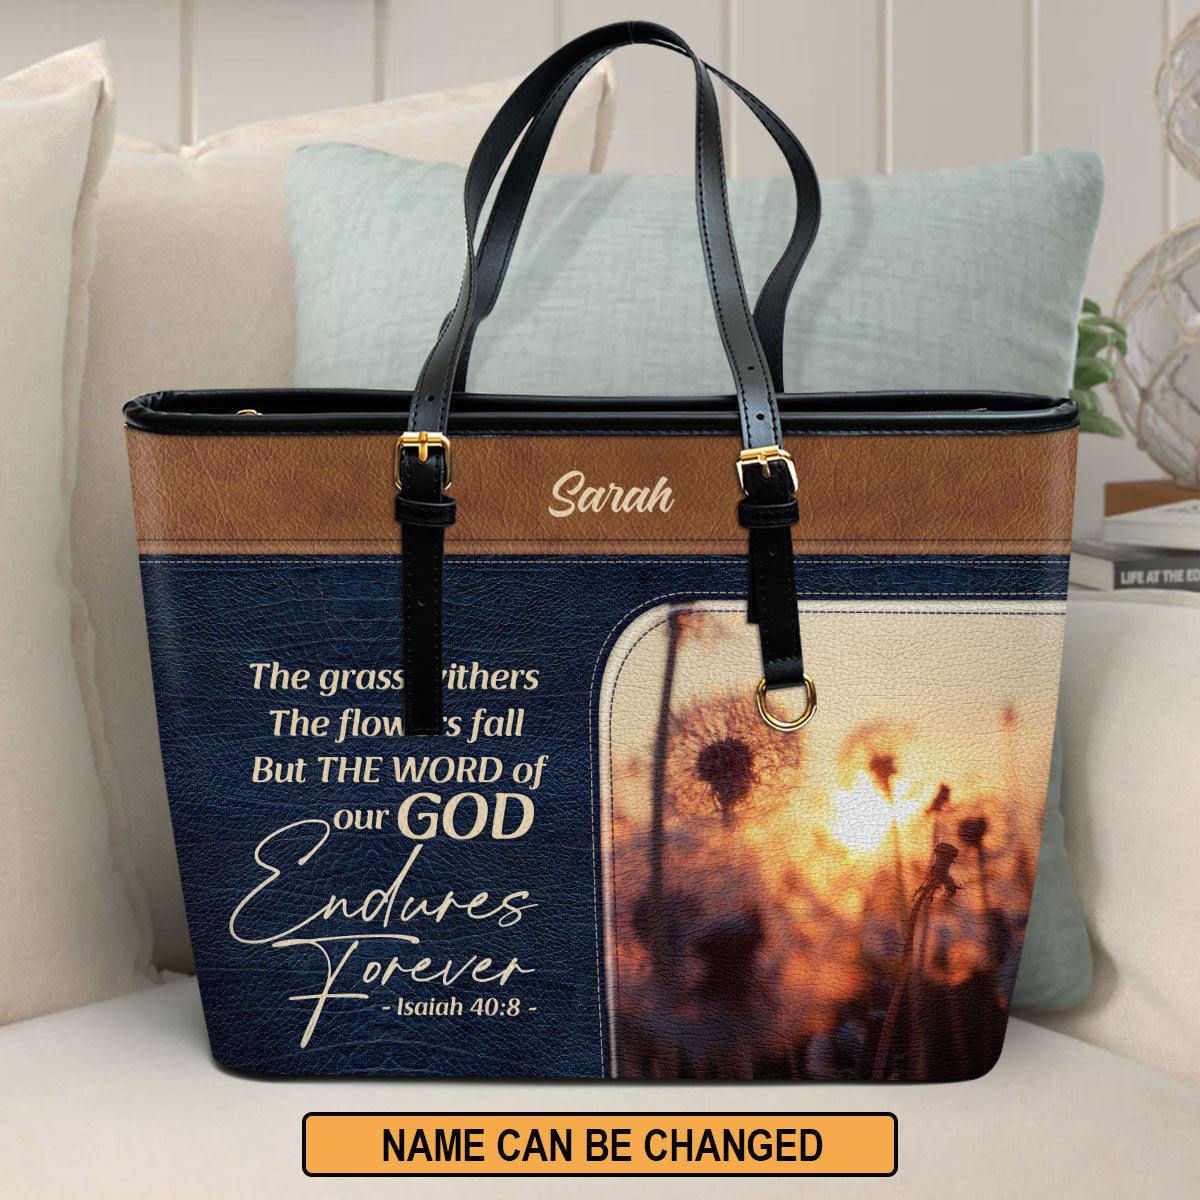 Personalized Large Leather Tote Bag The Word Of Our God Endures Forever - Spiritual Gifts For Christian Women